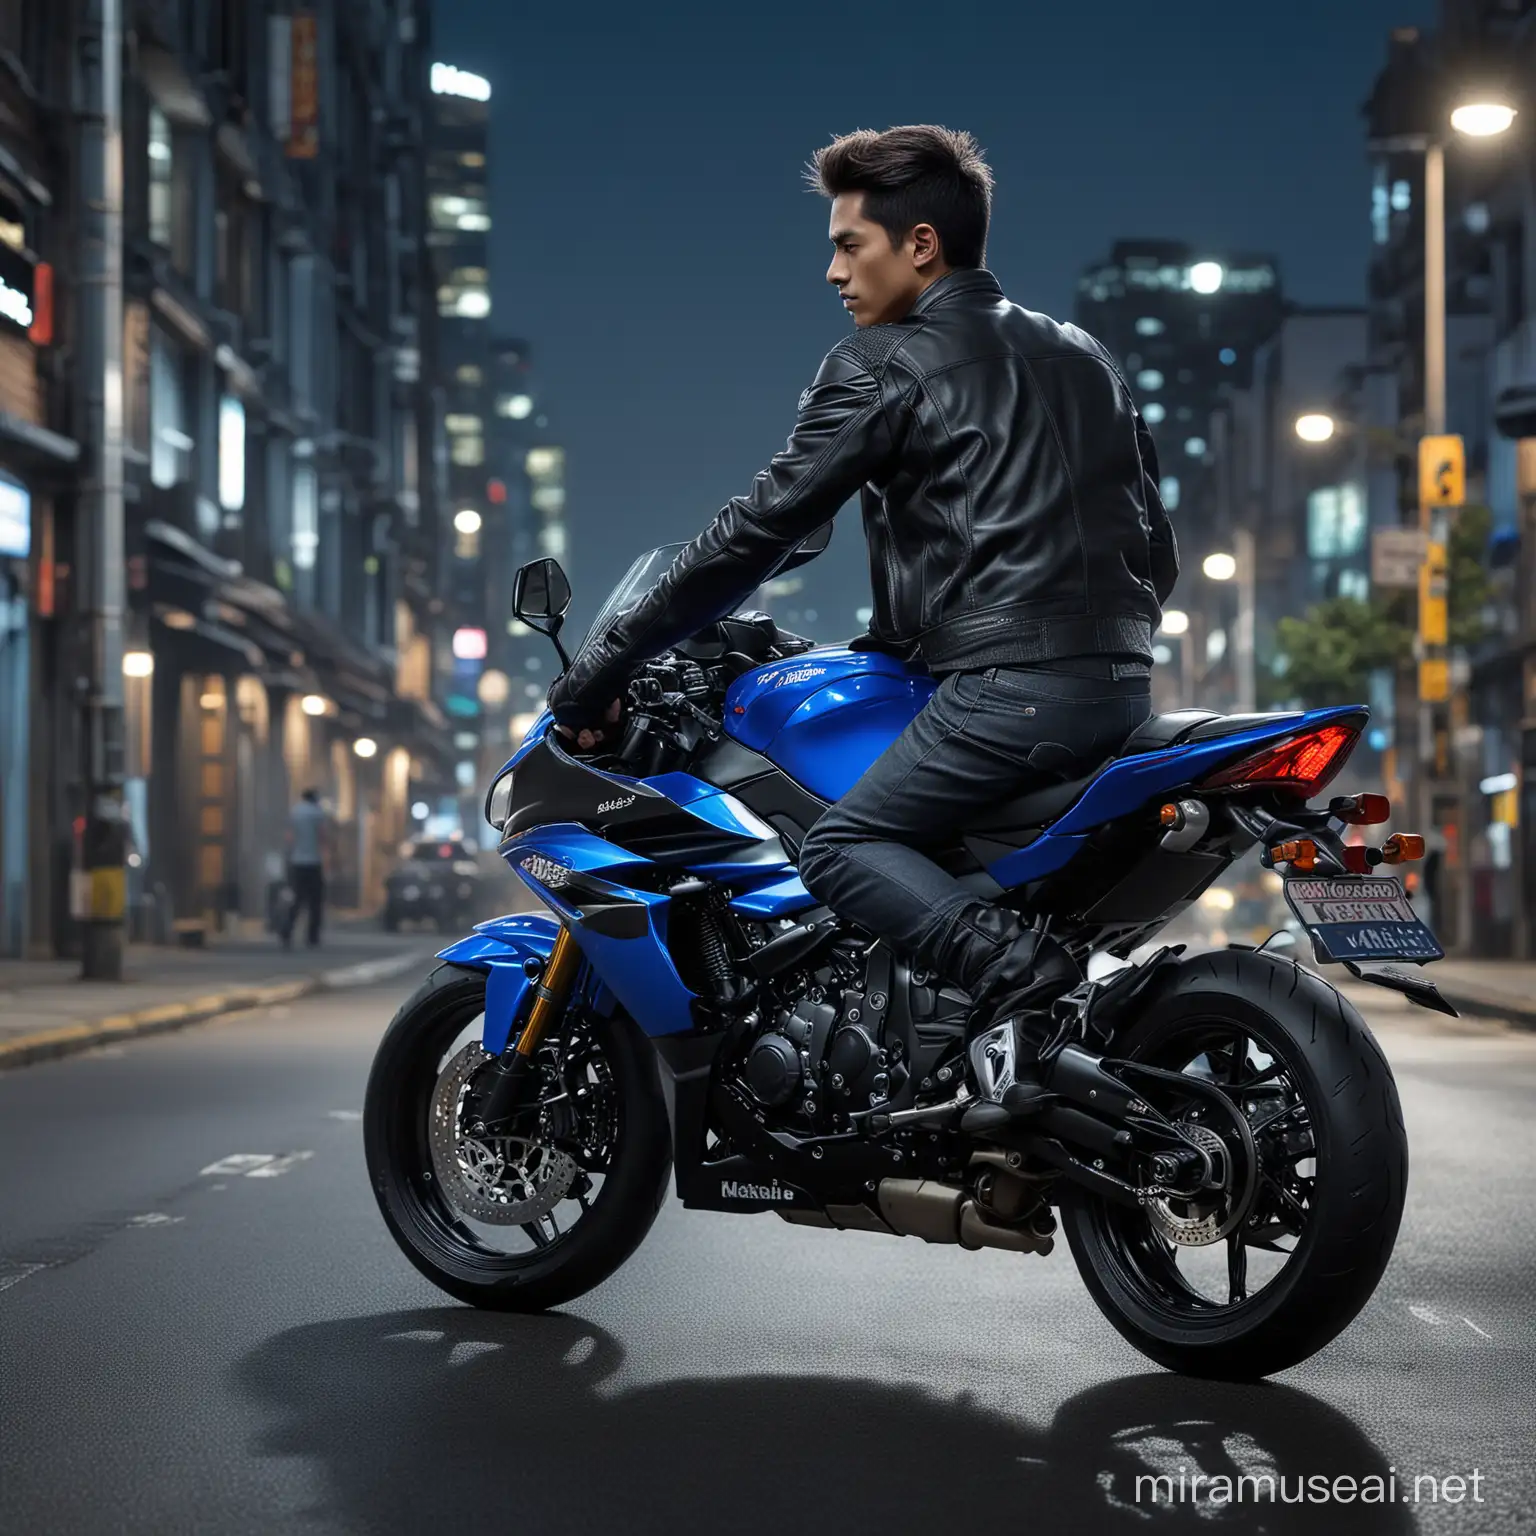 create a realistic picture of a young Indonesian man with hair in a bun, sitting posing on a sleek blue Kawasaki Ninja 1000RR sports motorbike at night. The individual wore a black leather jacket, adding an urban and modern aesthetic to the scene. The bright blue color of the motorbike stands out against the dark background. Ambient city lights illuminate the surroundings, creating a contrast of light and shadow, 800mm lens, realistic, hyperrealistic, photography, professional photography, deep photography, ultra HD, very high quality, best quality, medium quality, HDR photo, focus photo, deep focus, very detail, original photo, original photo, ultra sharp, nature photo, masterpiece, award winner, taken with hasselblad x2d